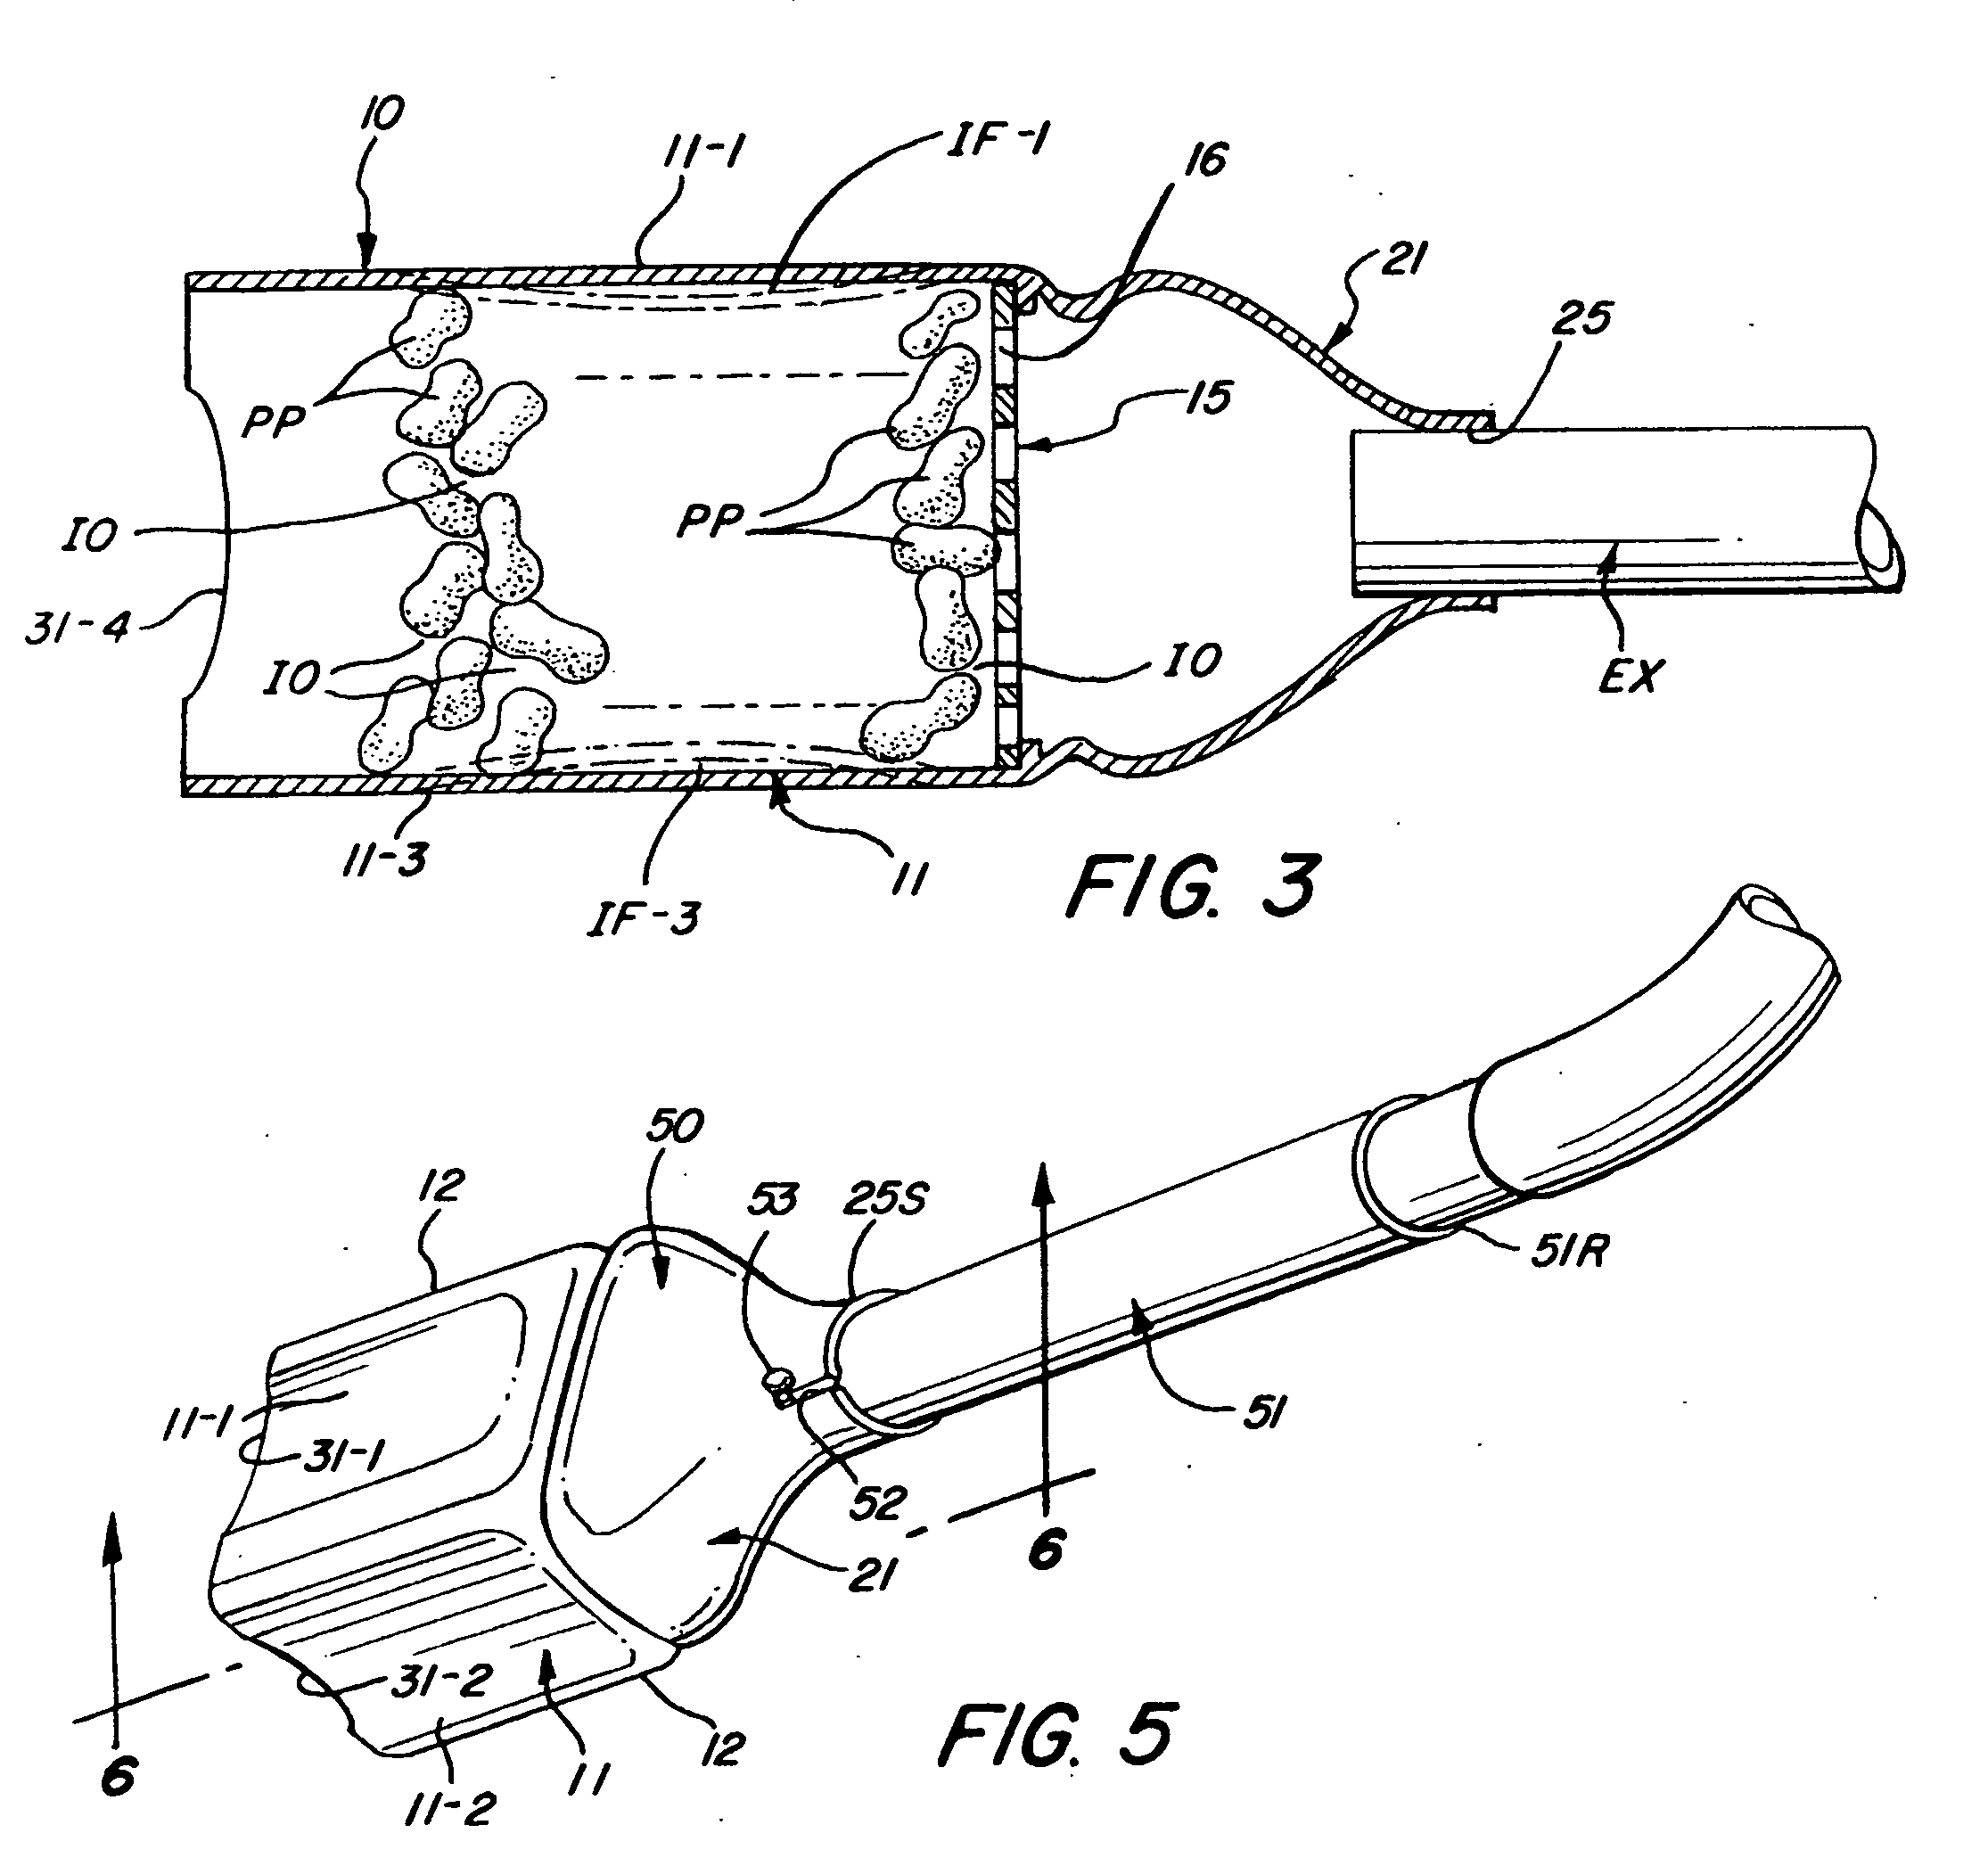 Apparatus for collecting lightweight packing particulates